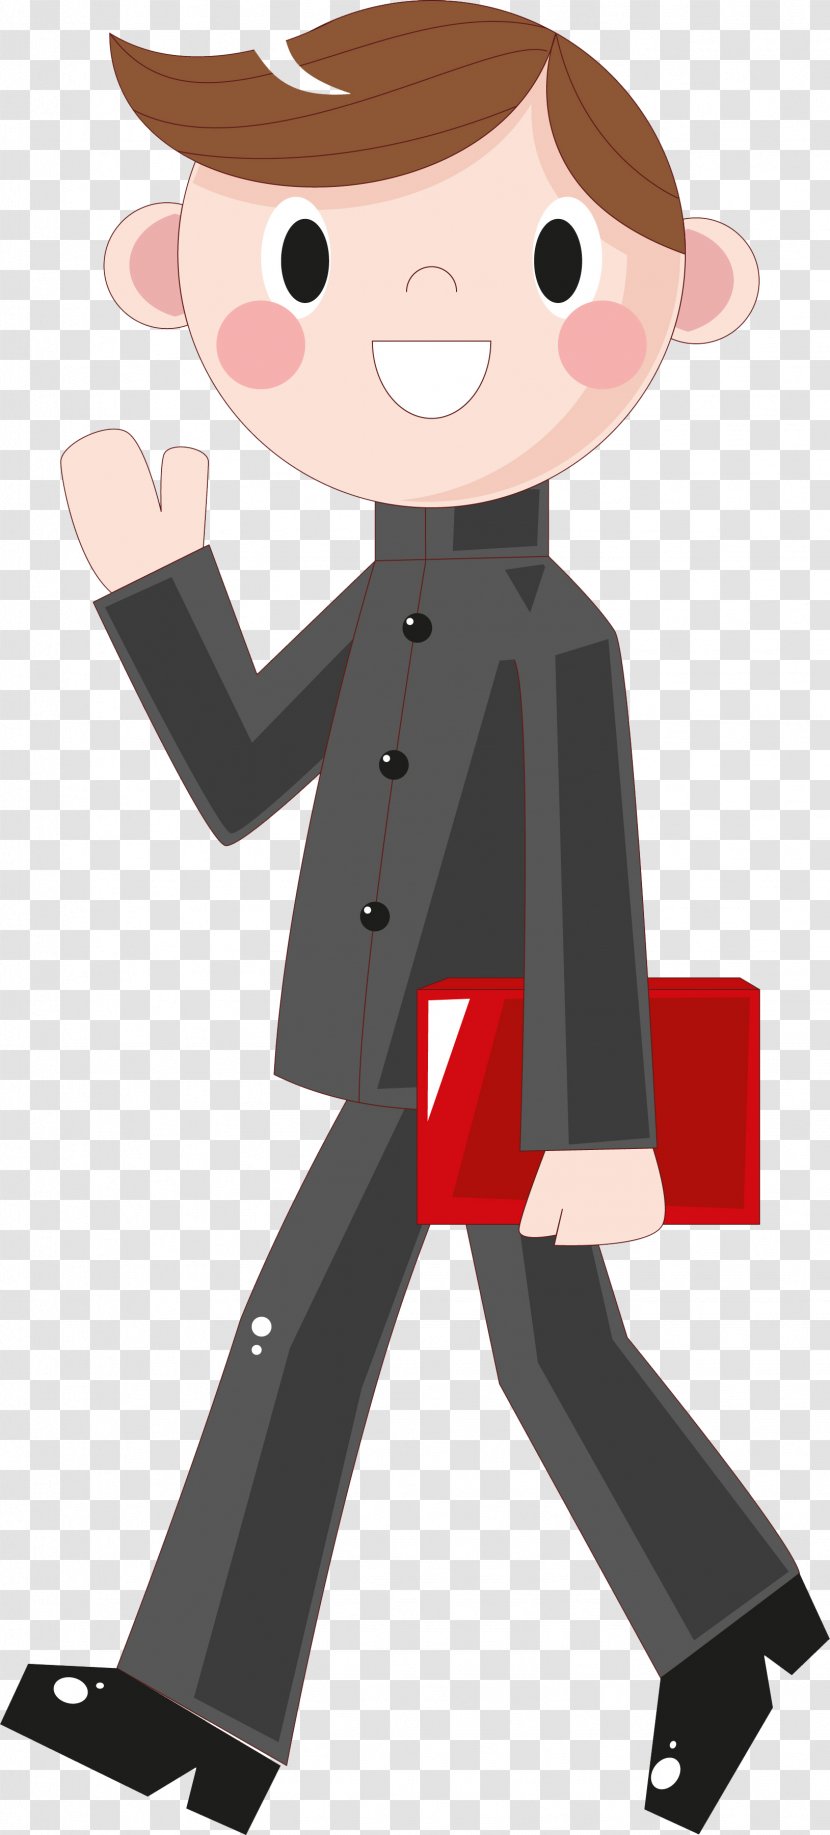 Cartoon Student - Learning - School Transparent PNG